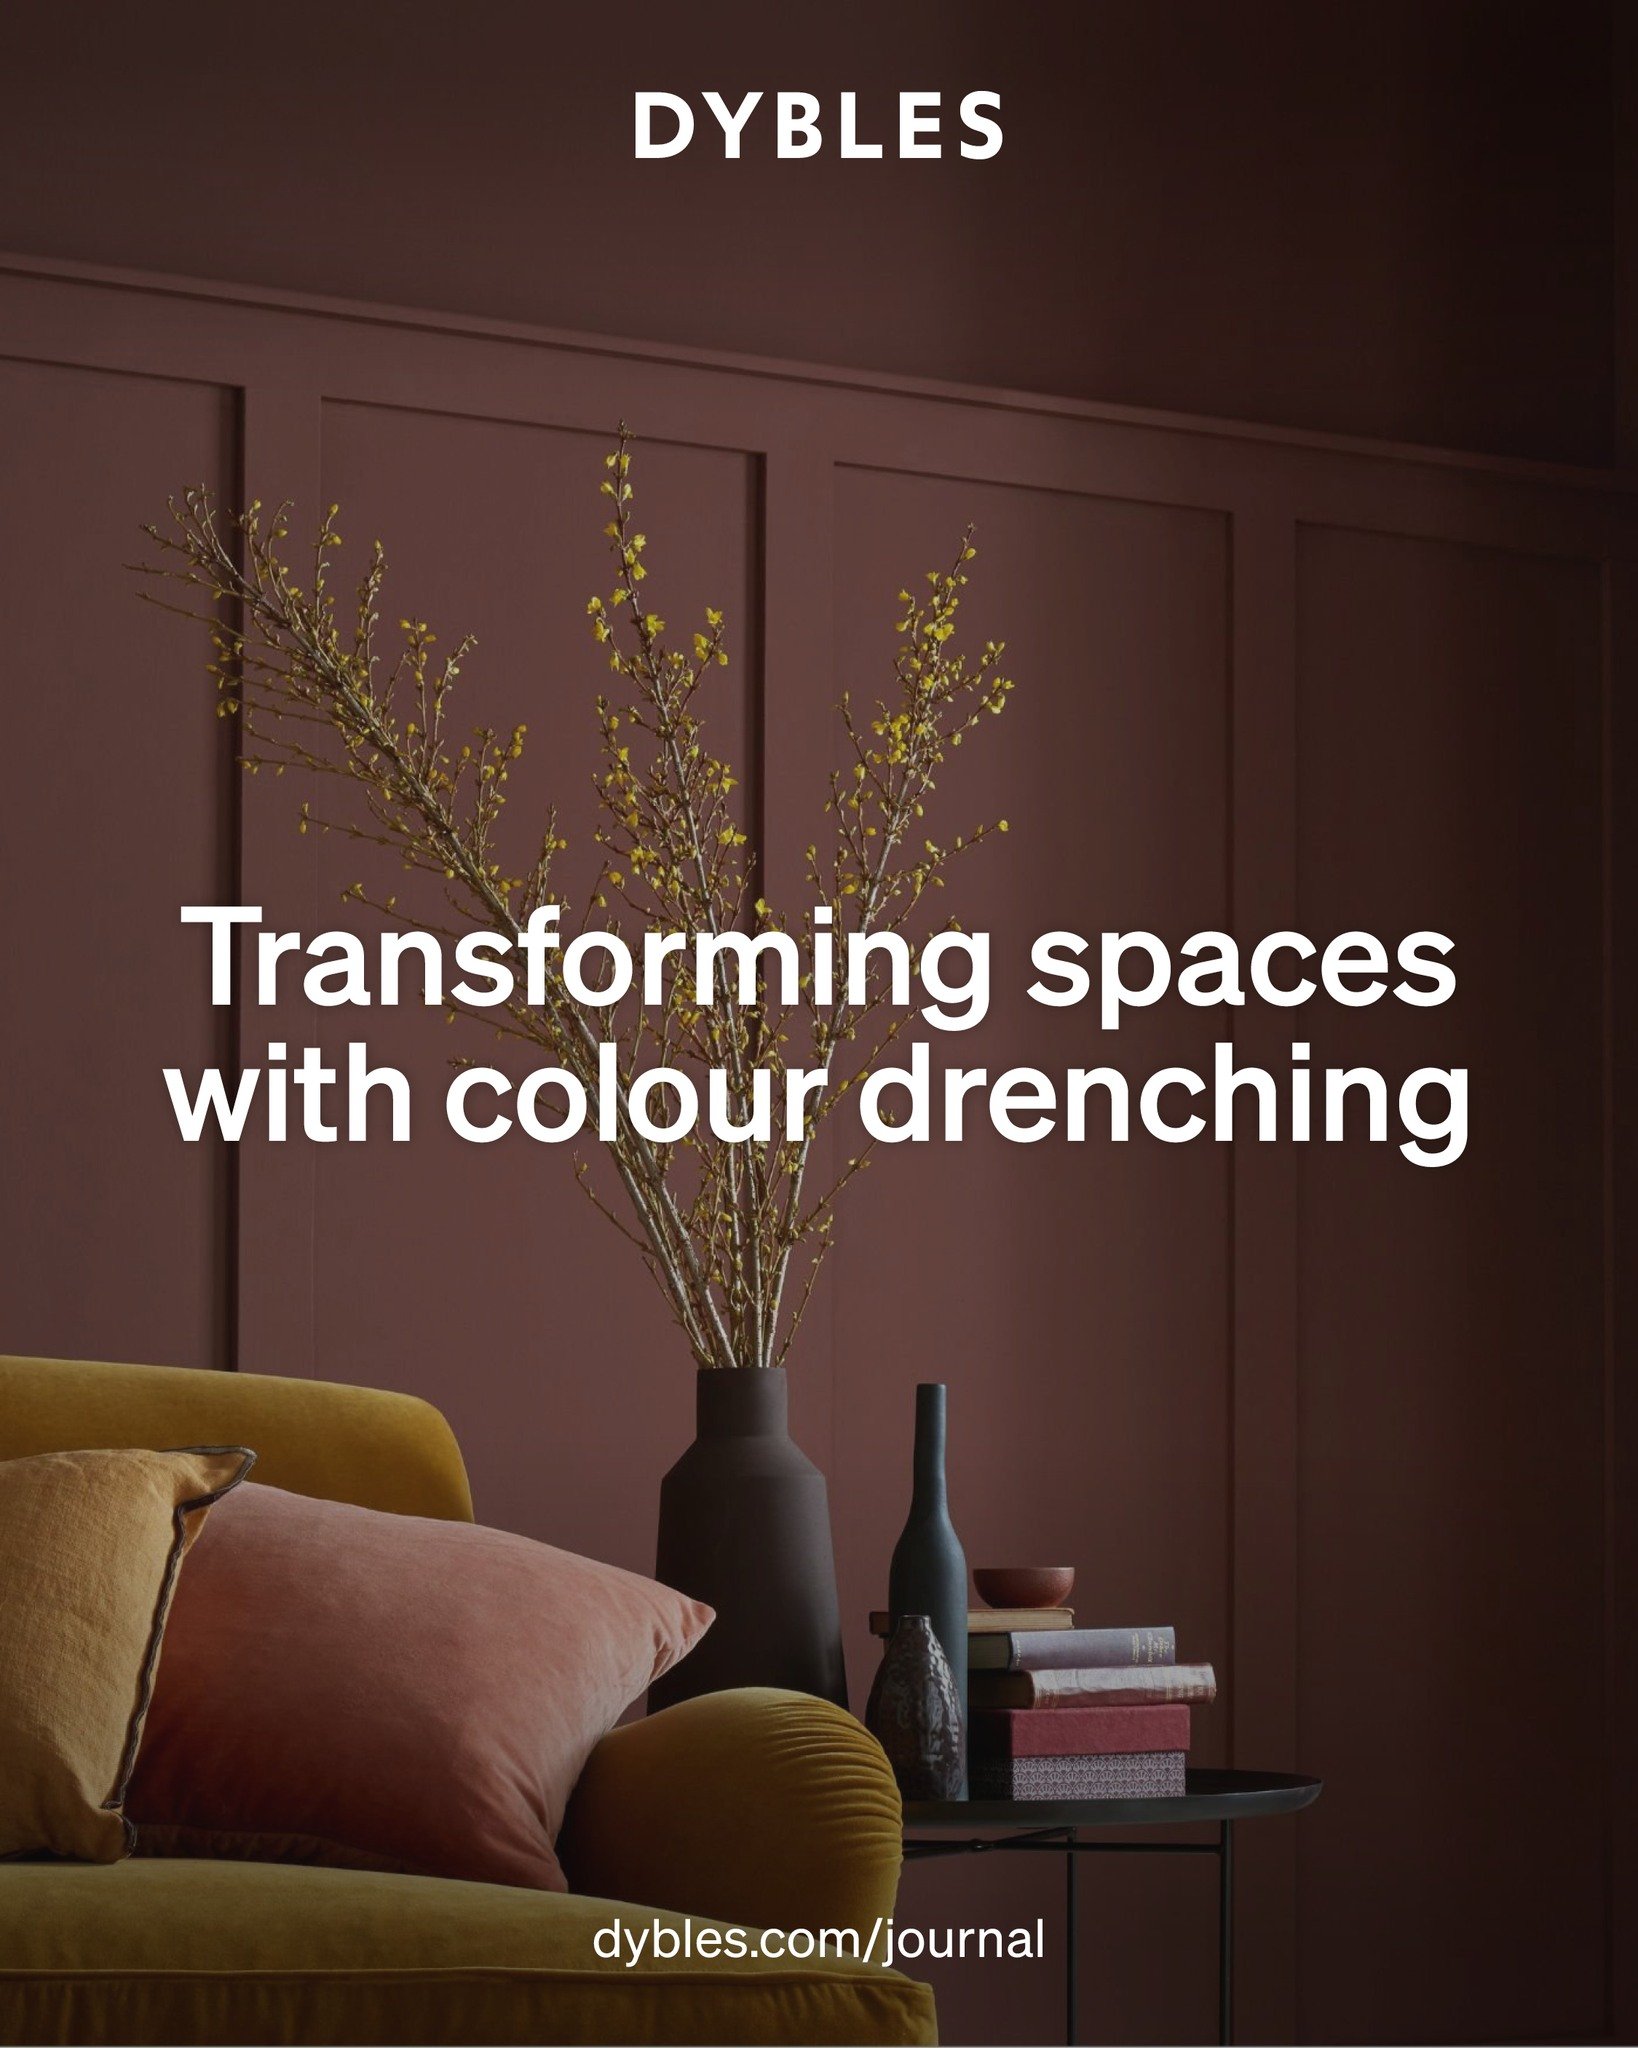 #Journal Colour drenching, a trend gaining momentum in the world of interior design, offers a bold and immersive approach to decorating spaces.

➡ Swipe to explore the concept of colour drenching and discover how it can transform your home into a vib